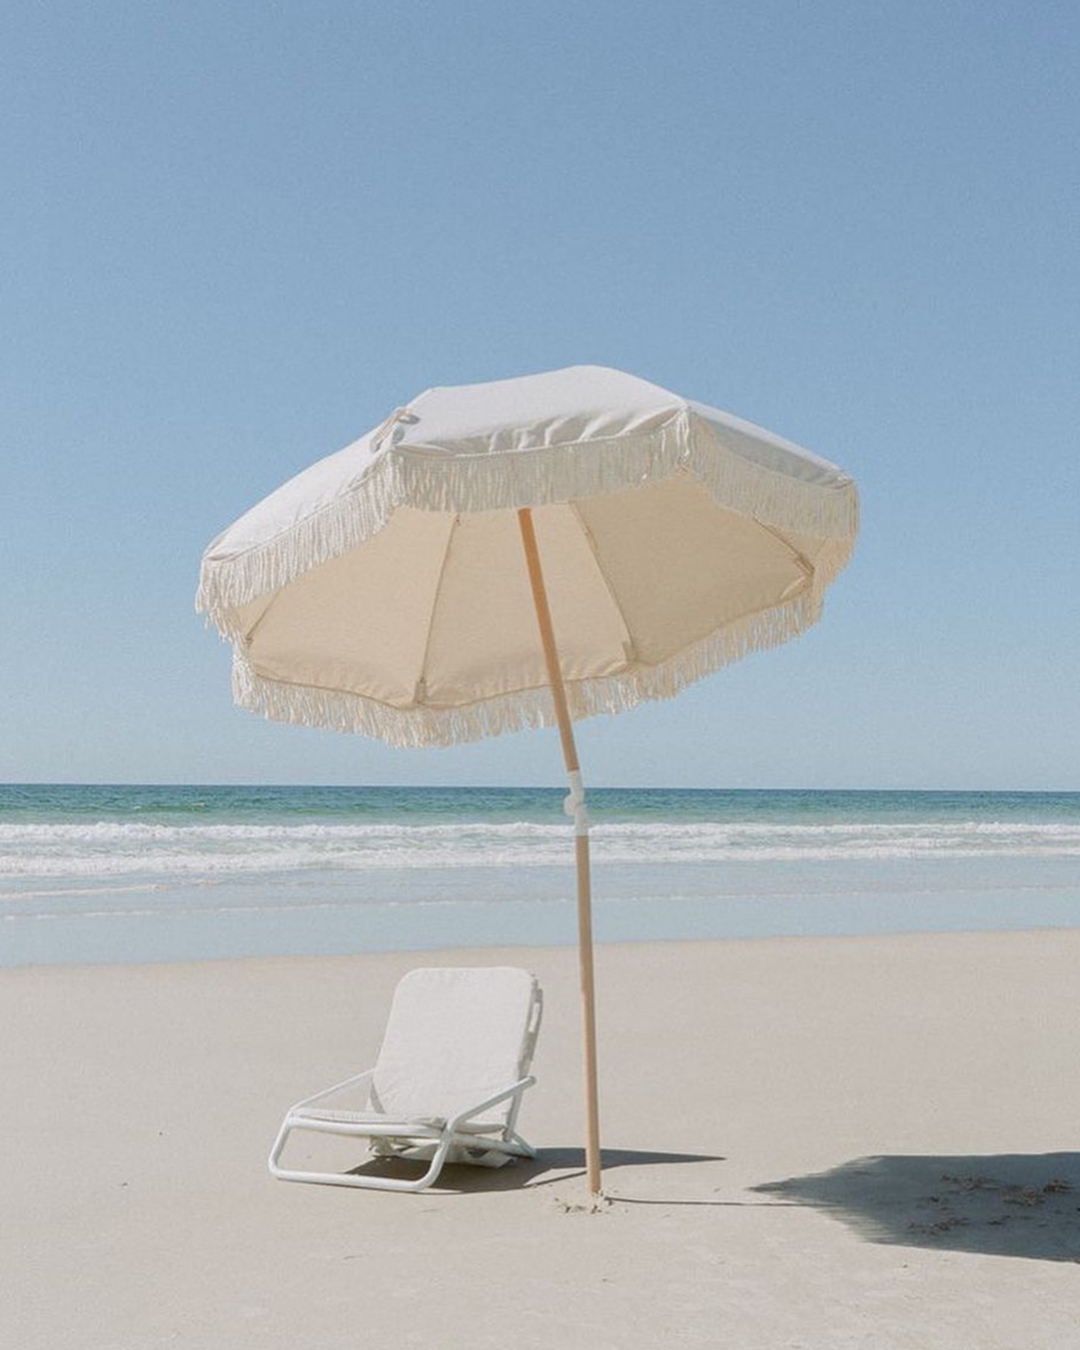 Dunes Folding Beach Chair with Matching Beach Umbrella by Sunday Supply Co.